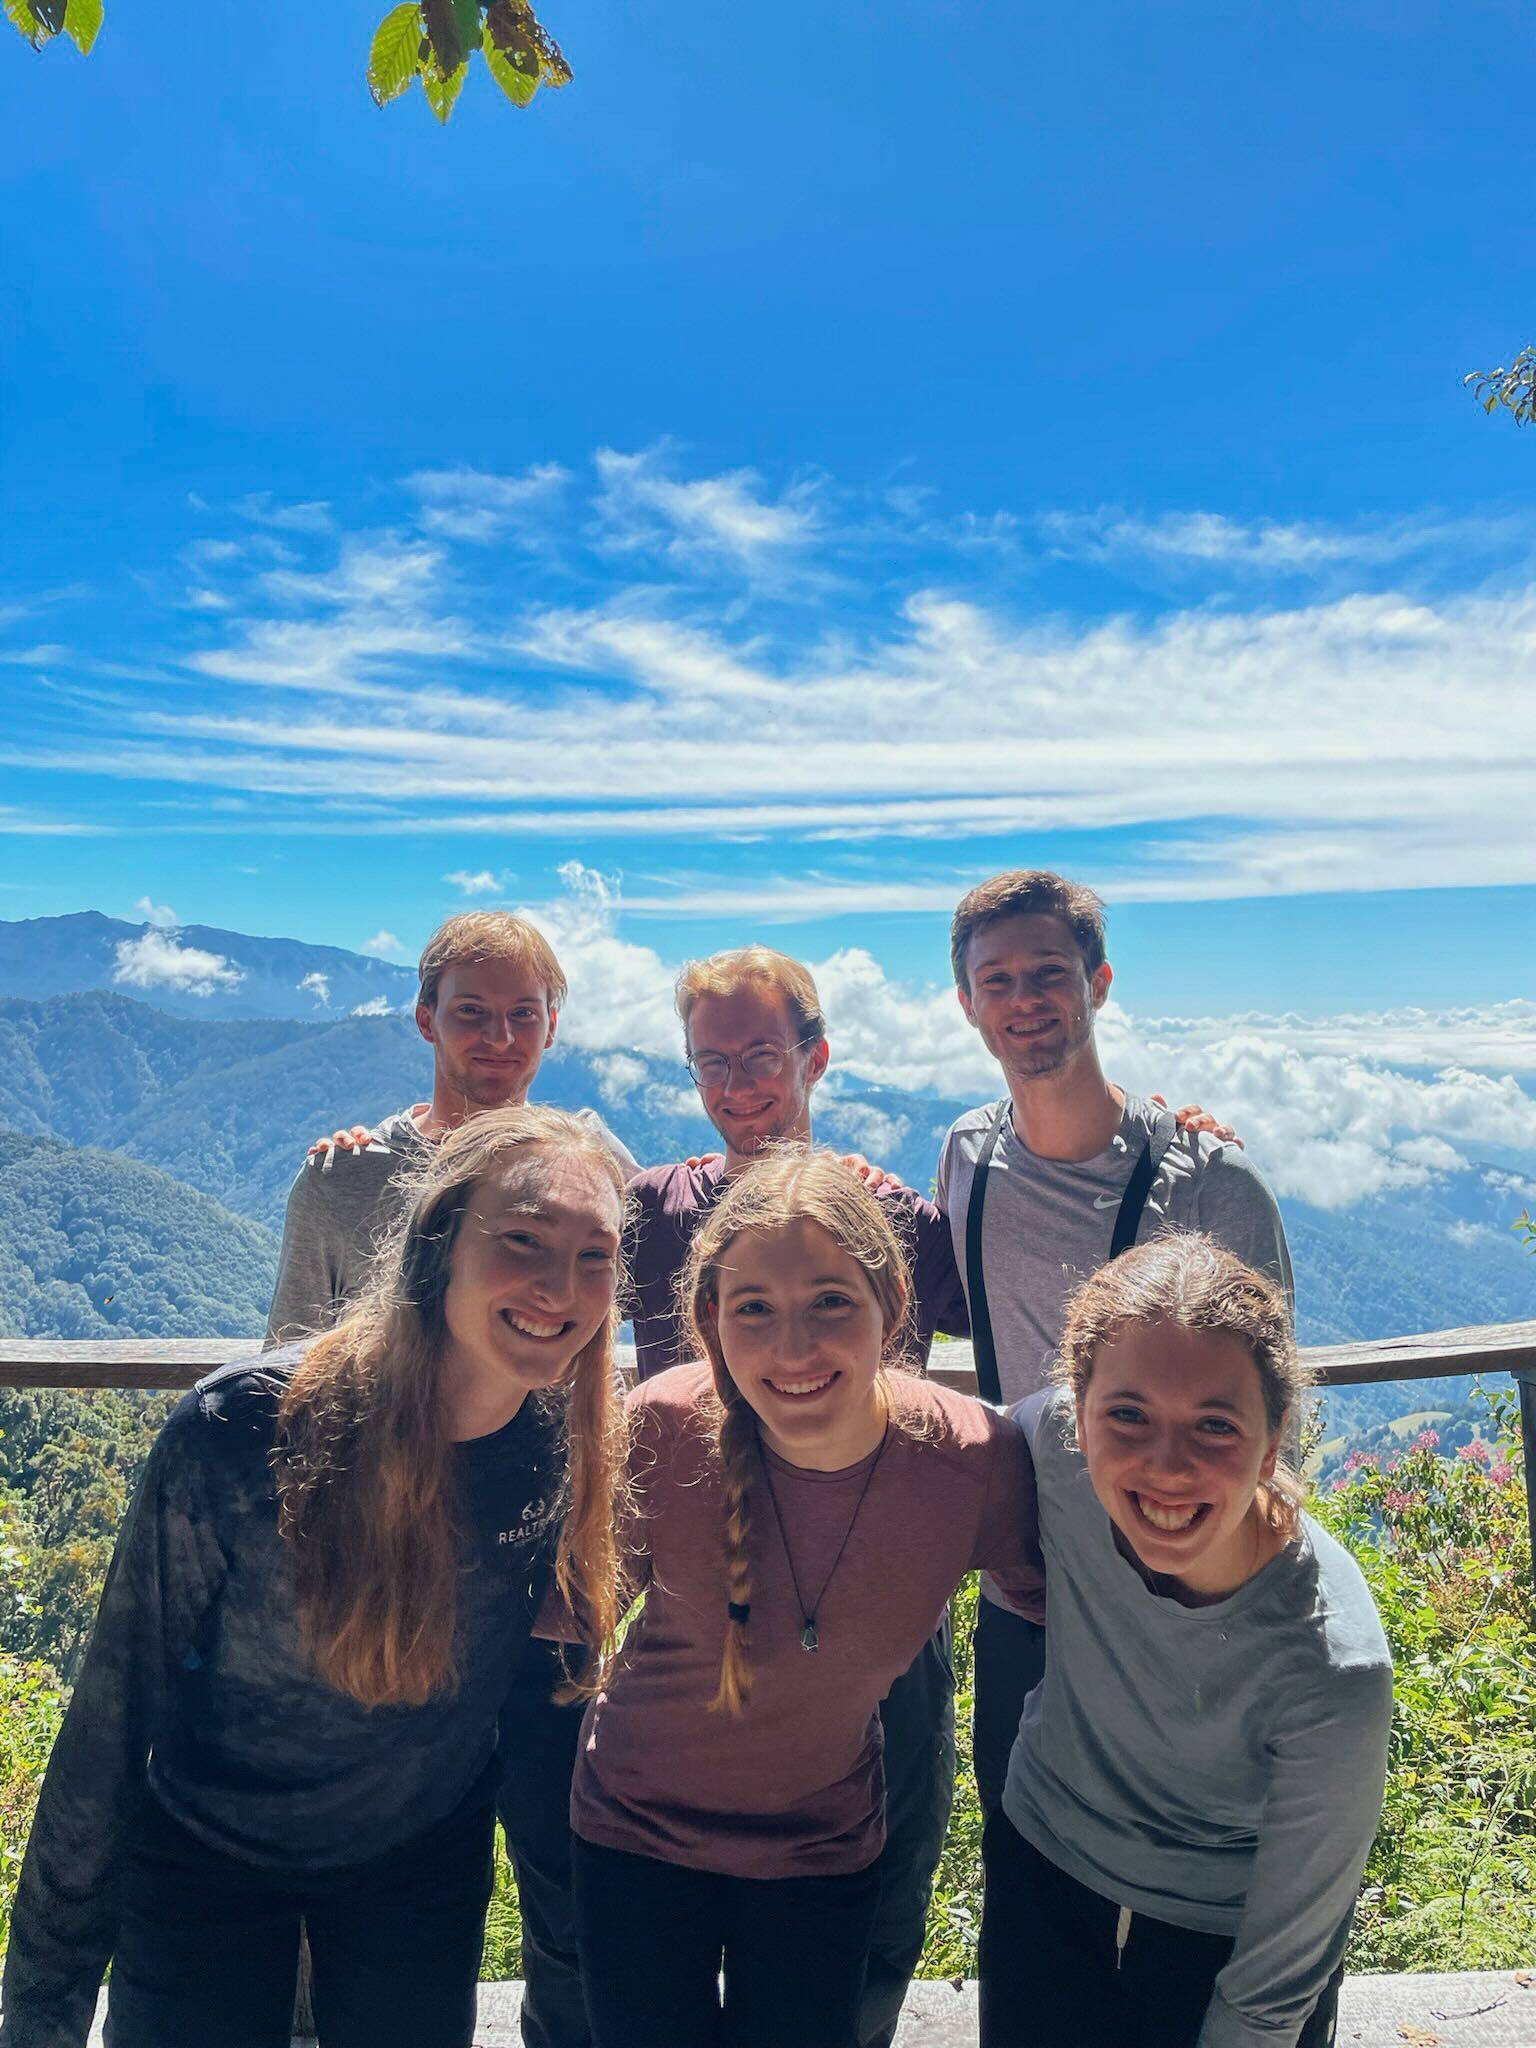 A photo of six students in front of a mountainous viewpoint.